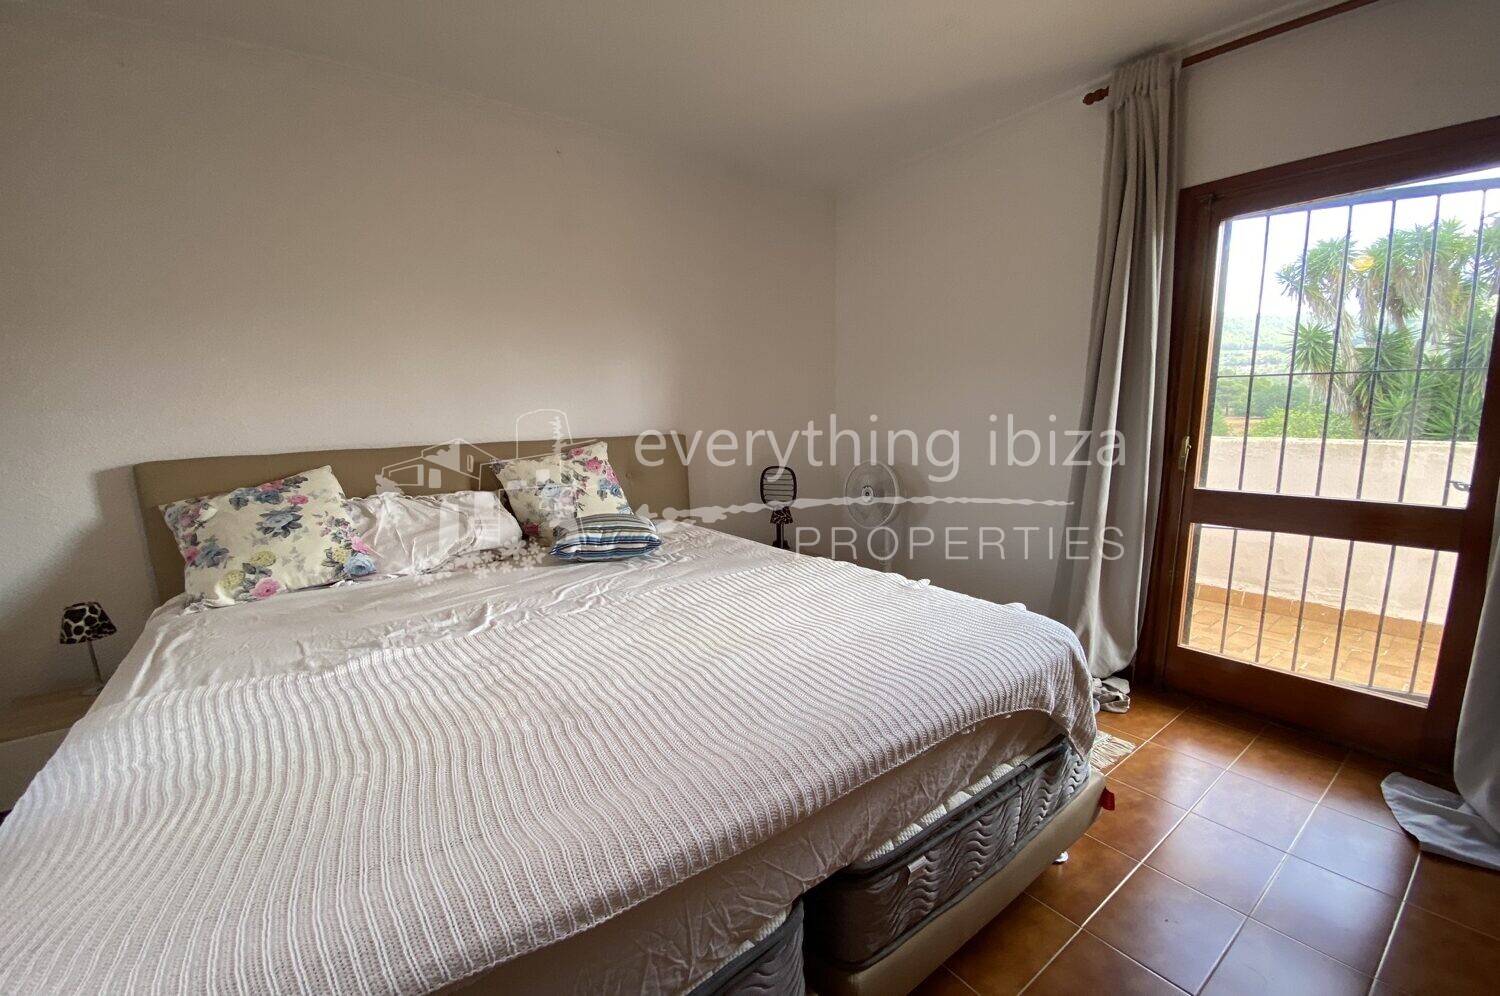 Charming Tradition Style Villa on a Large Rural Plot, ref. 1389, for sale in Ibiza by everything ibiza Properties